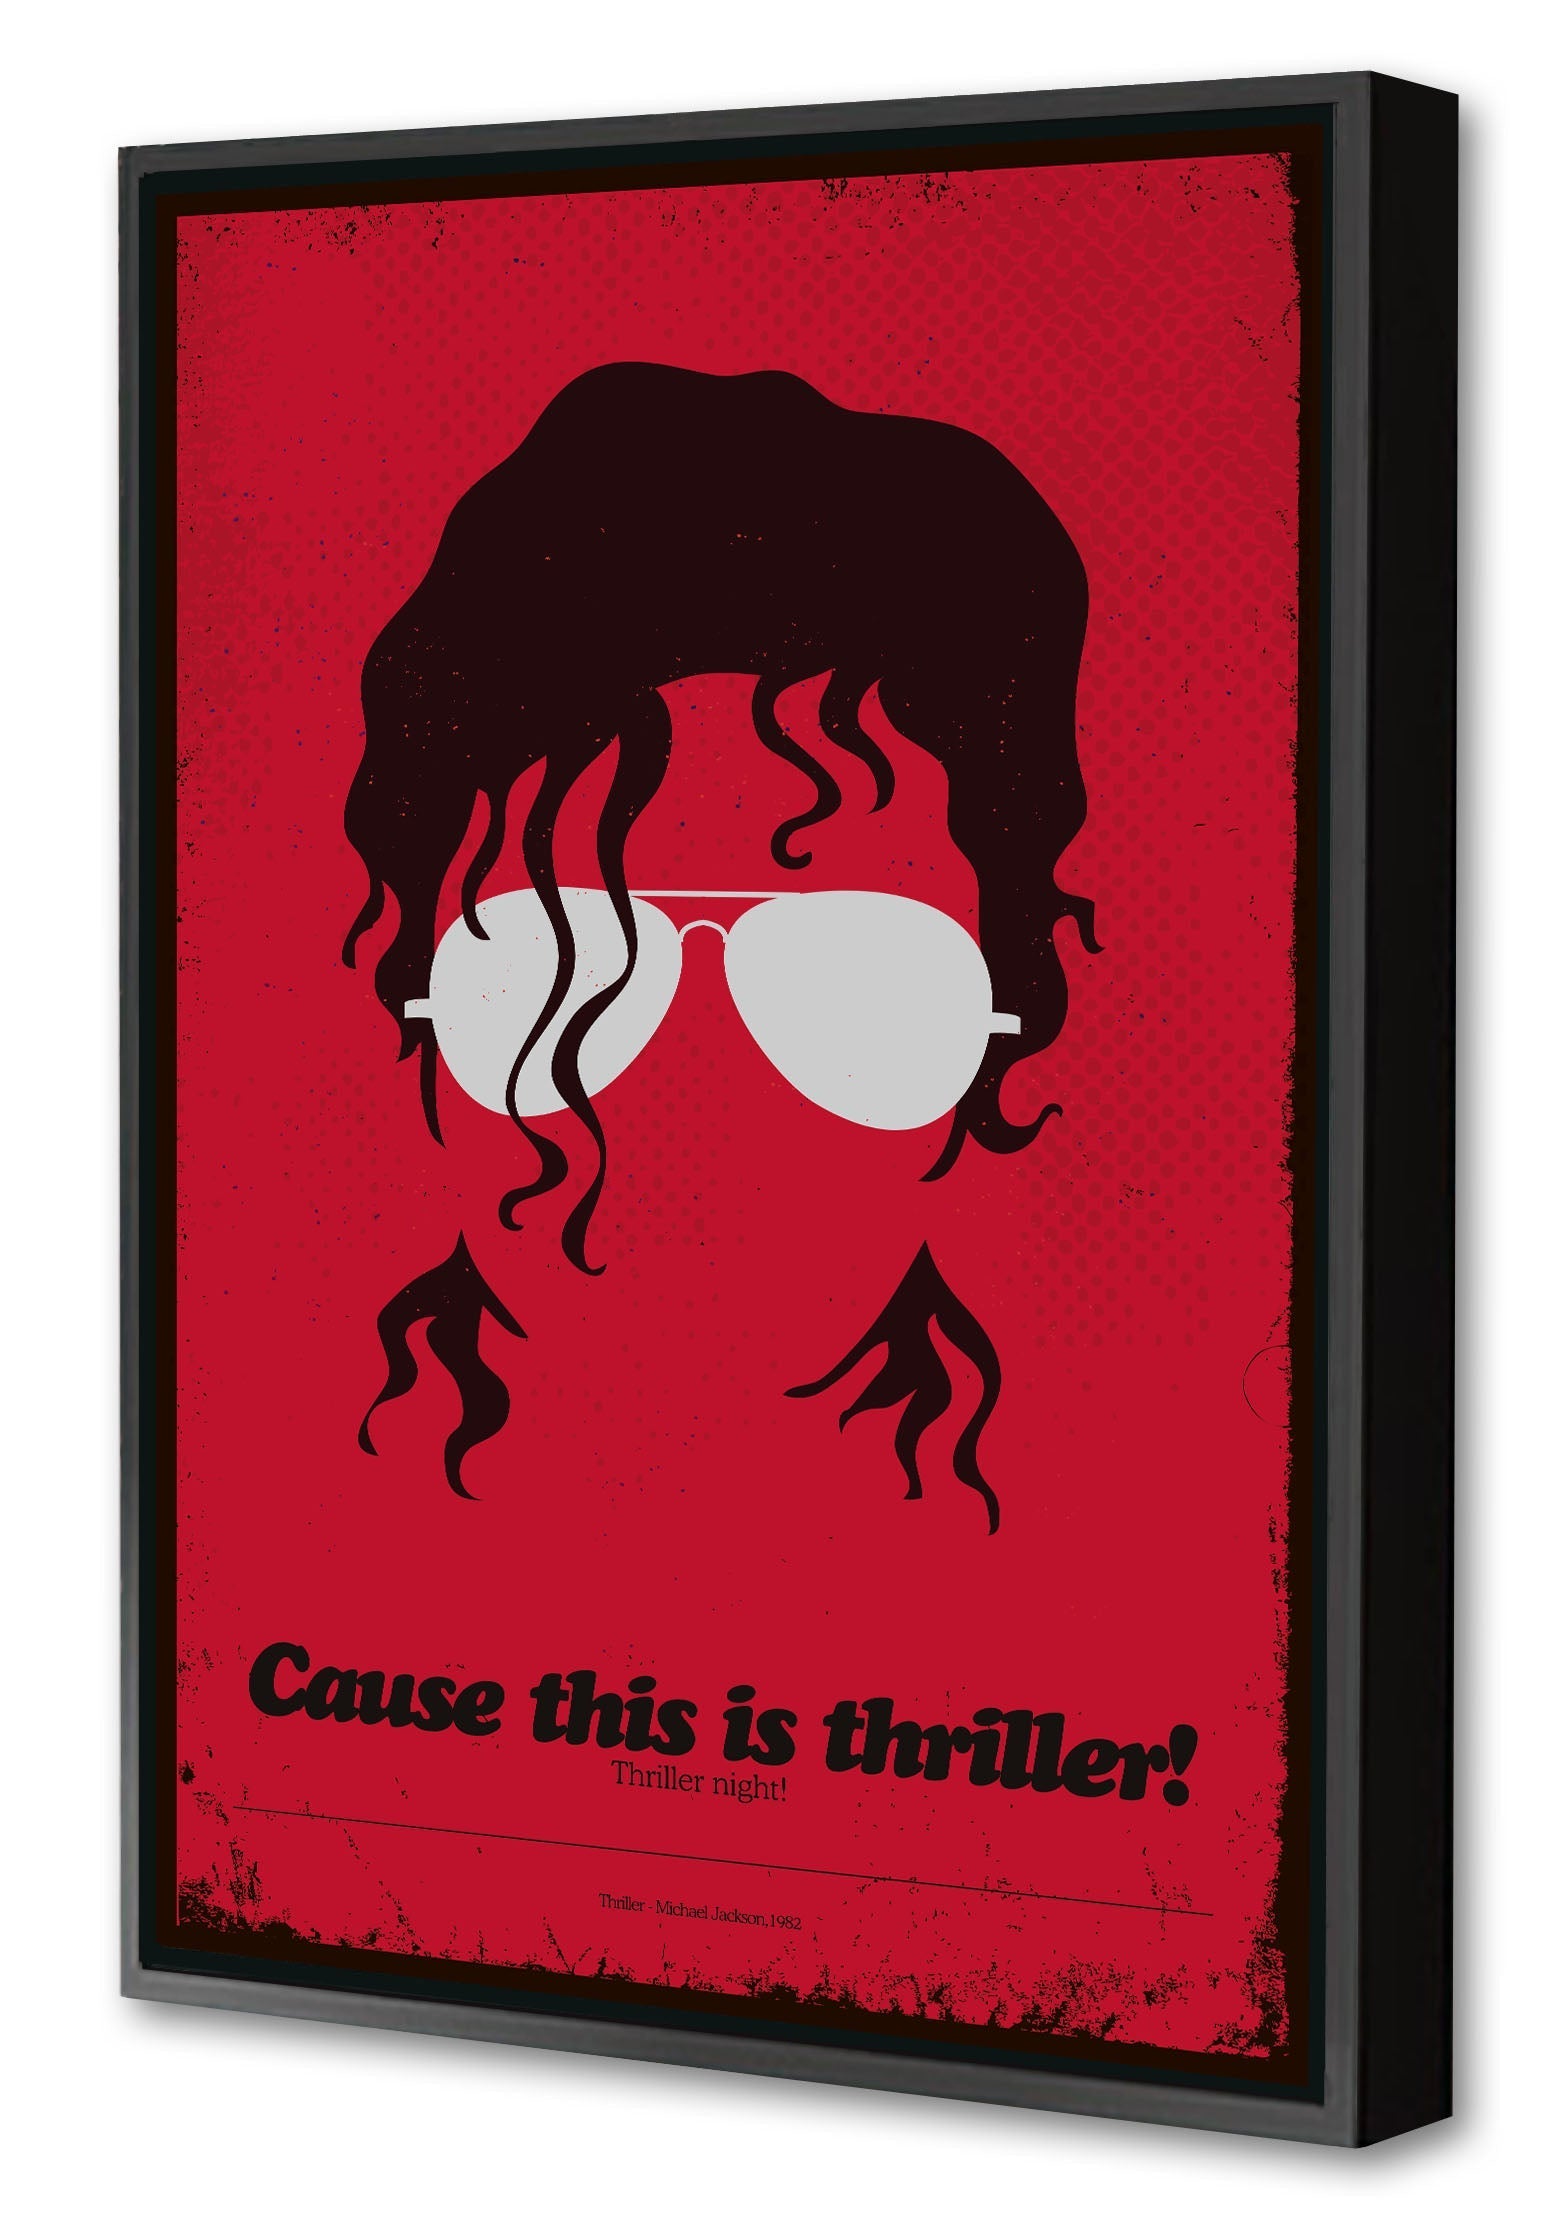 Mickael Jackson - Cause this is Thriller-concerts, print-Canvas Print with Box Frame-40 x 60 cm-BLUE SHAKER